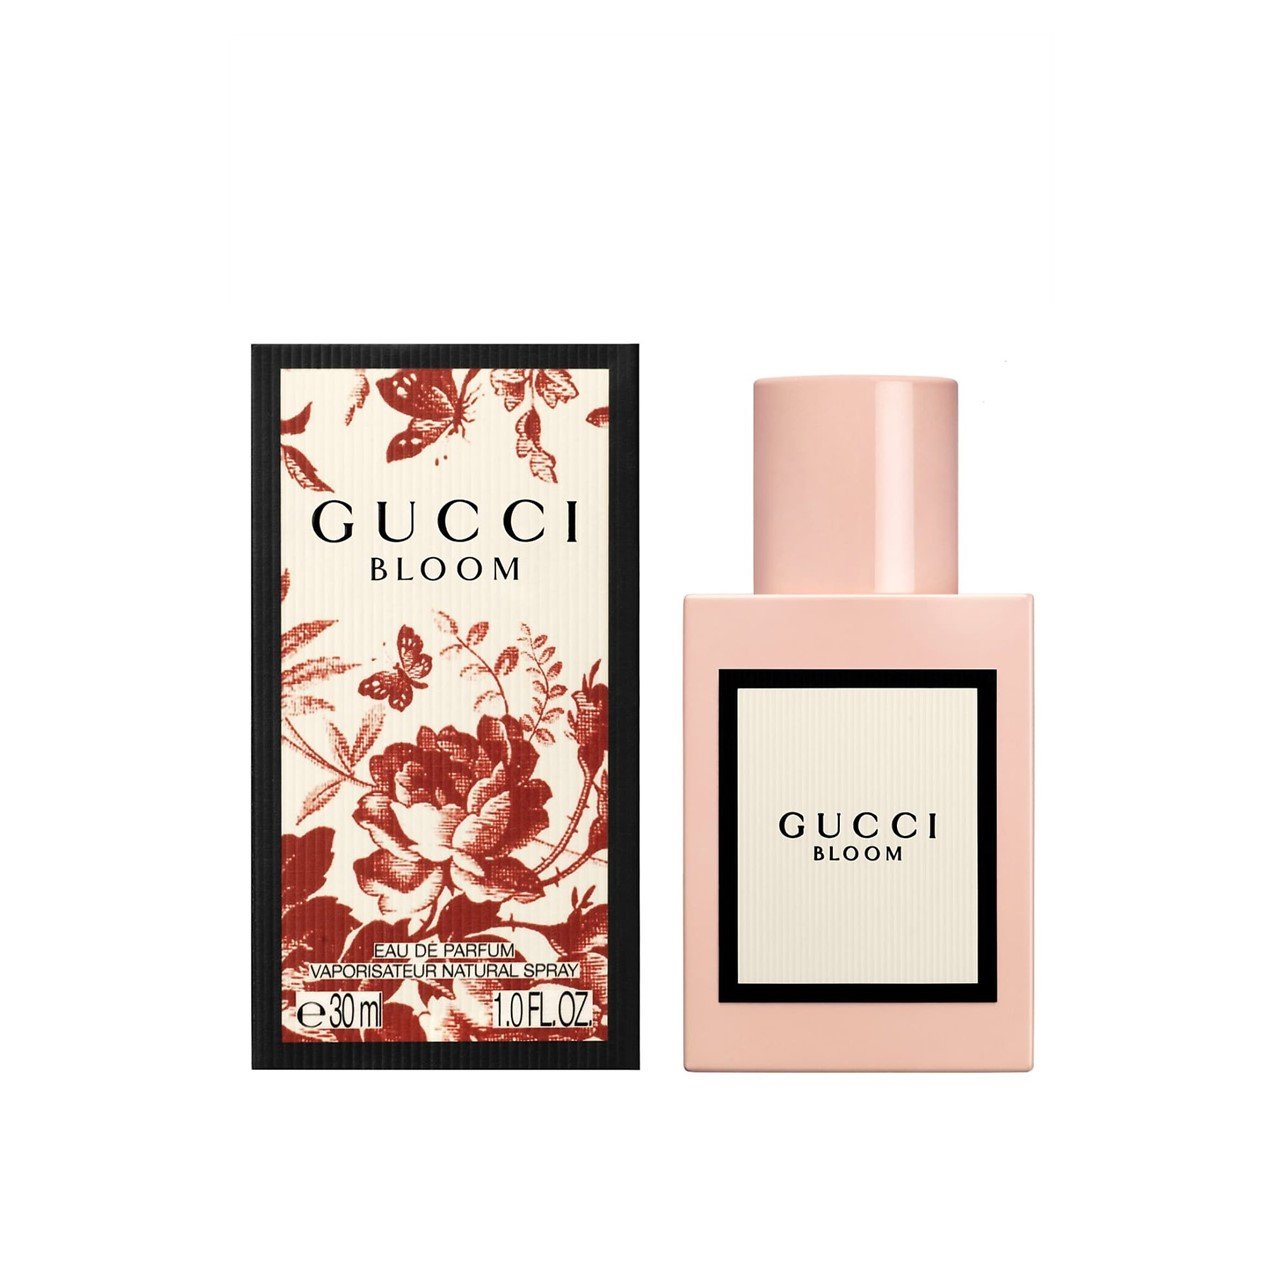 Gucci Bloom [Type*] : Oil 